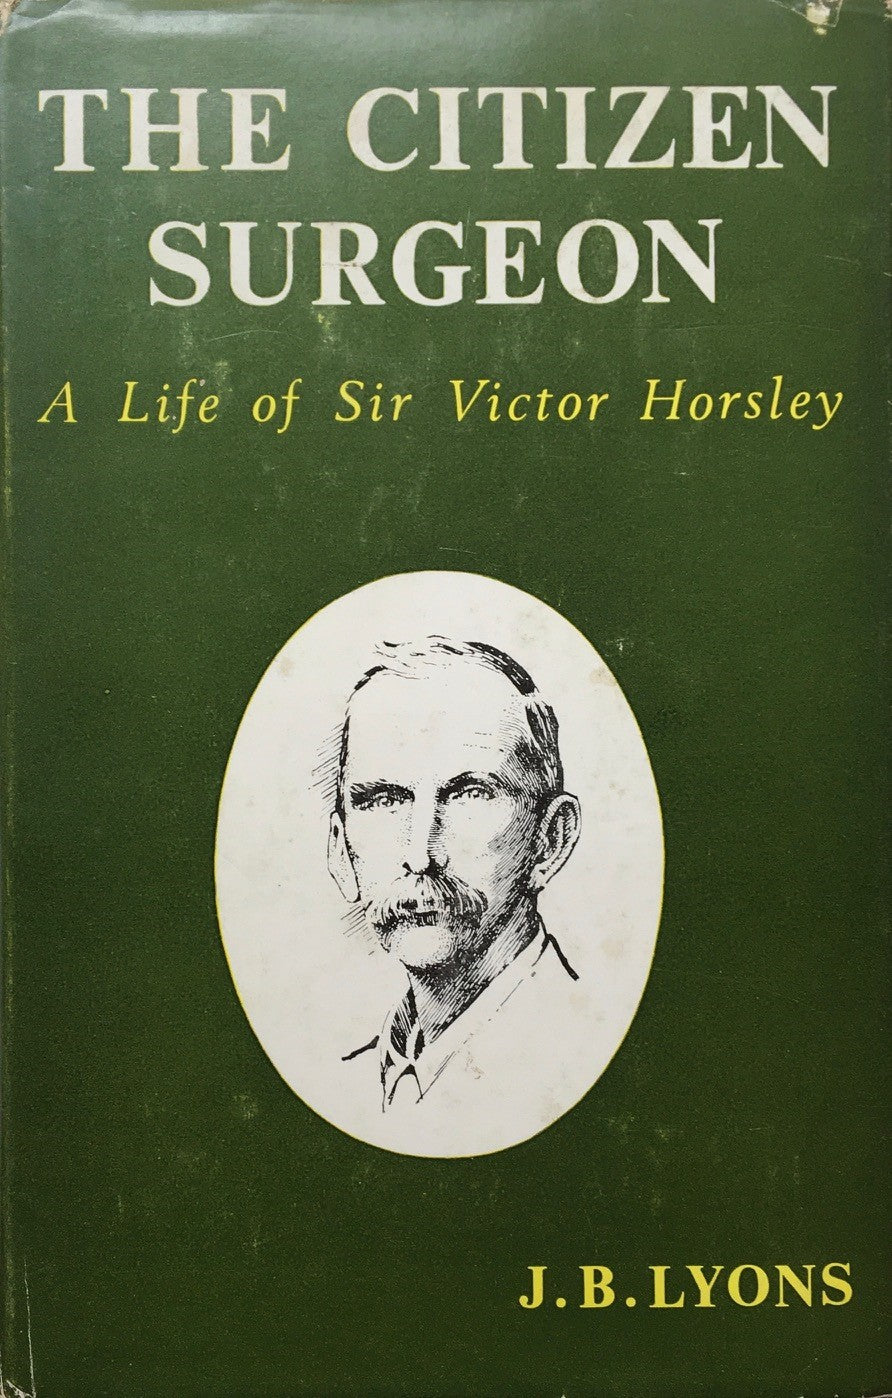 The citizen surgeon, a life of Sir Victor Horsley by J. B. Lyons